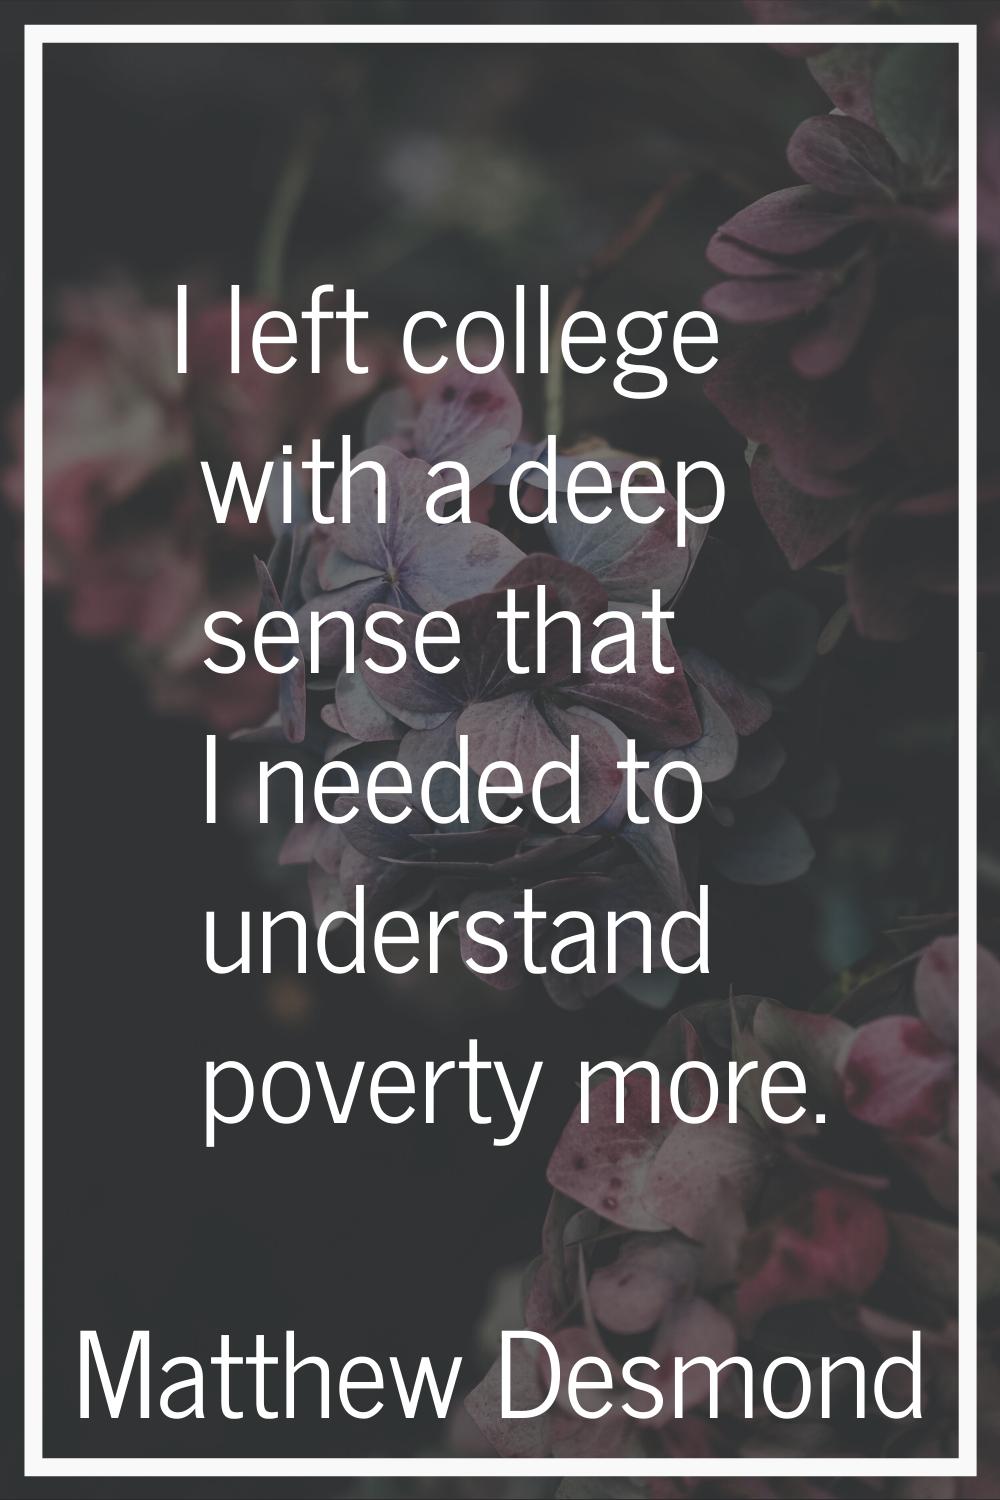 I left college with a deep sense that I needed to understand poverty more.